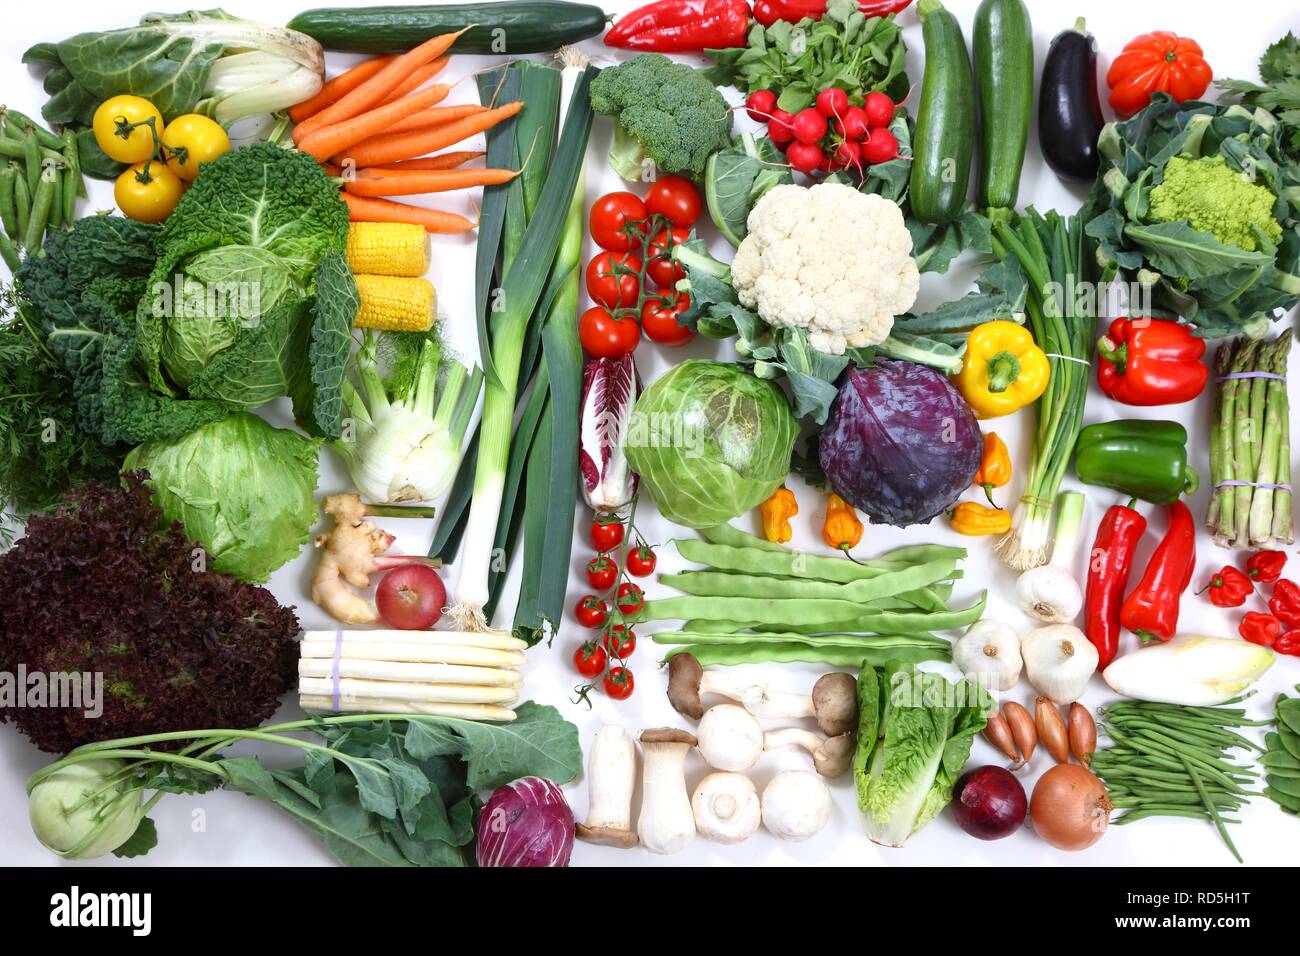 Various fresh vegetables and salads Stock Photo